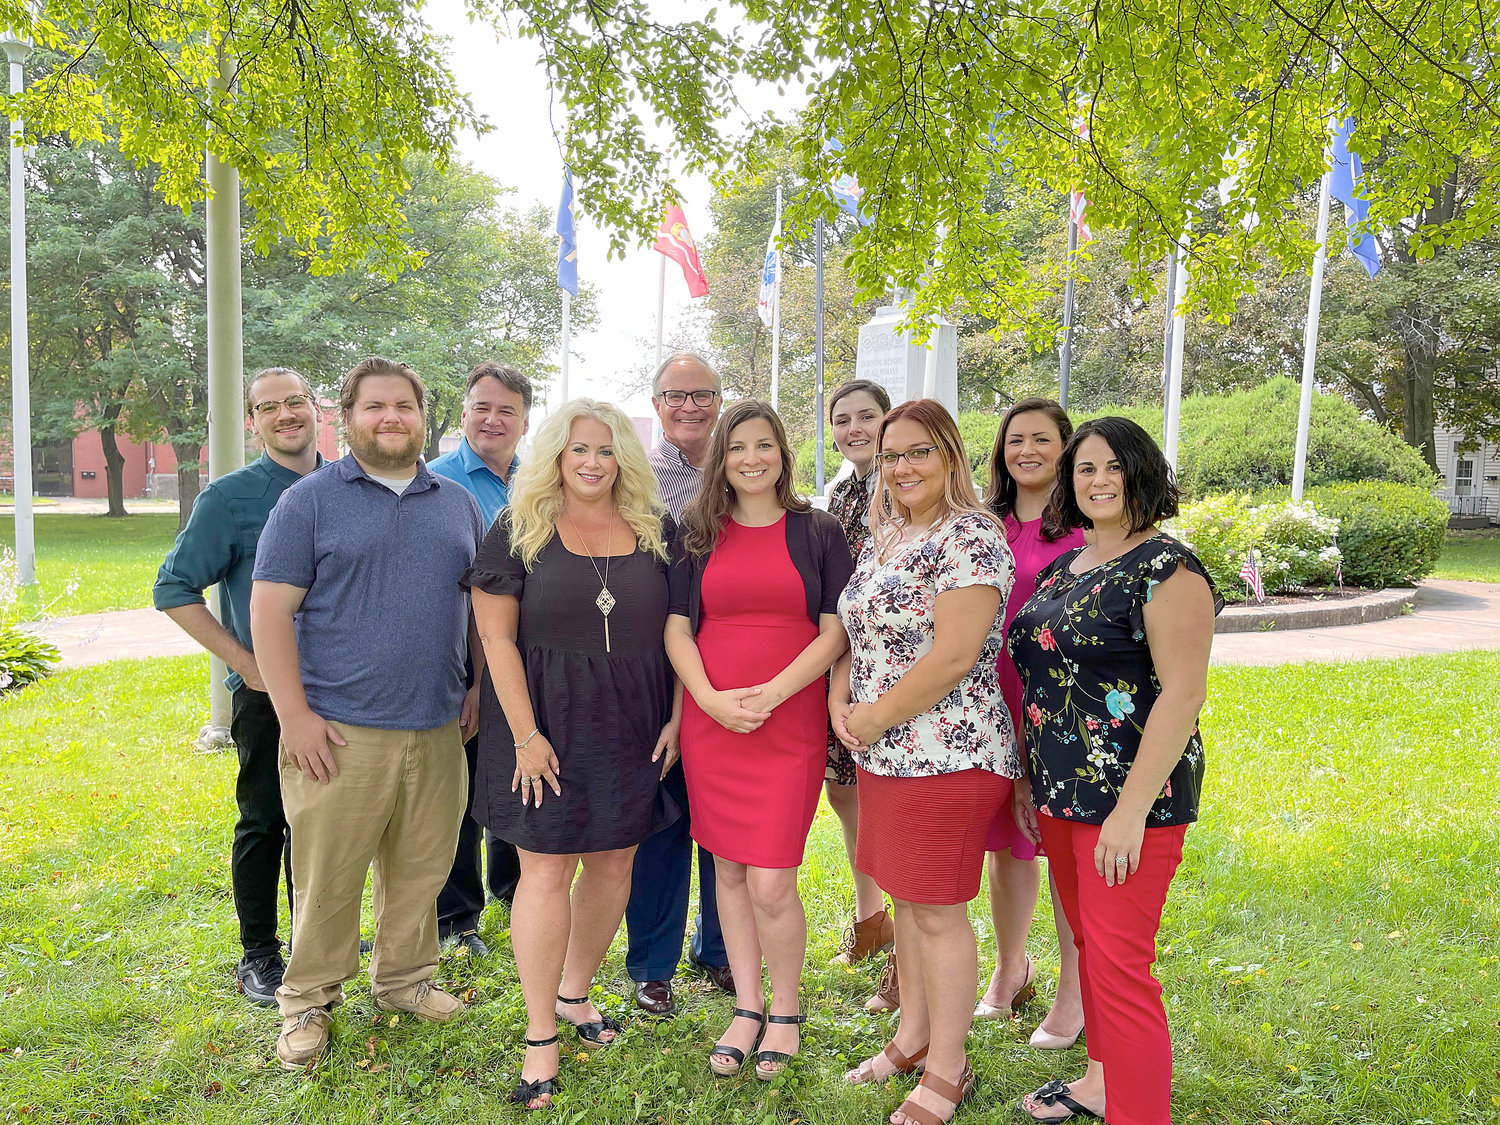 The staff of C &amp; D Advertising, a full-service integrated marketing agency at 103 W. Court St. in Rome, pose for a photo to celebrate the company’s 25 years in business.